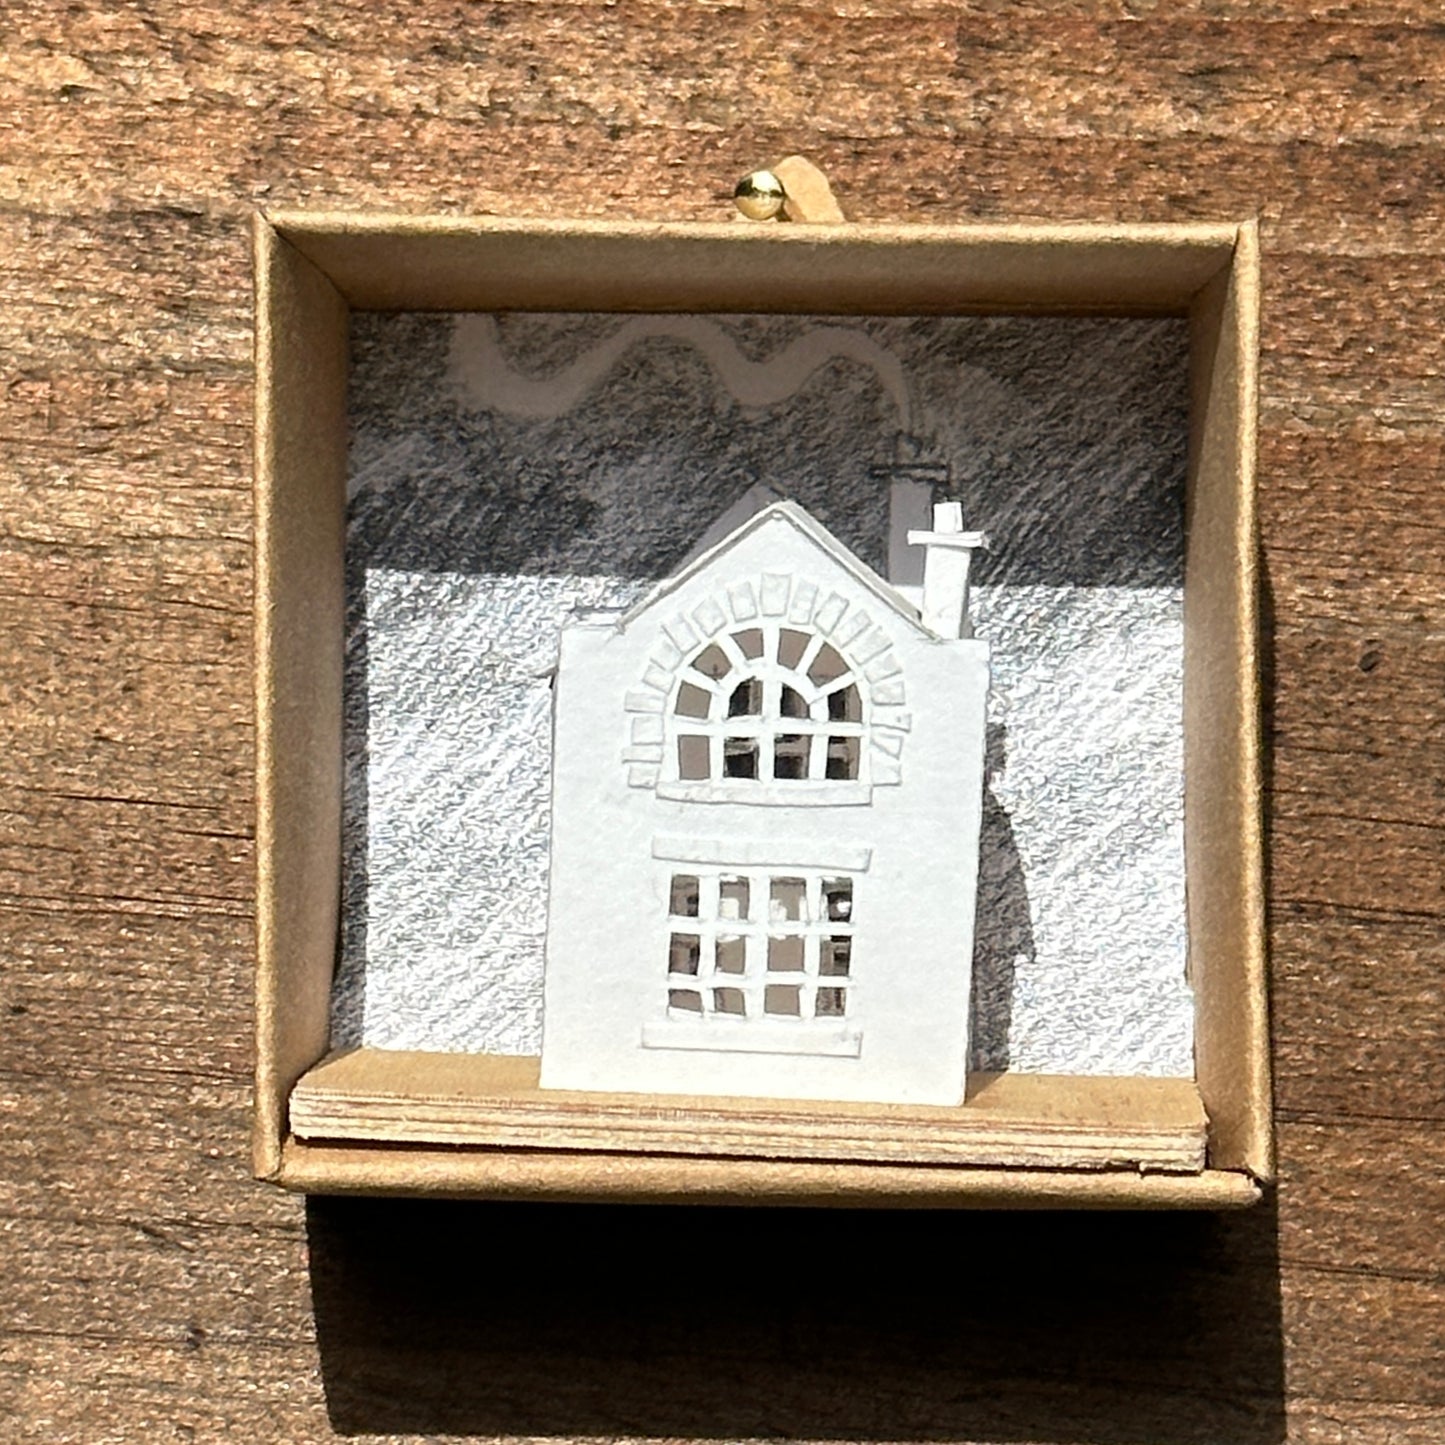 Miniature handmade paper house on plywood base in display box.